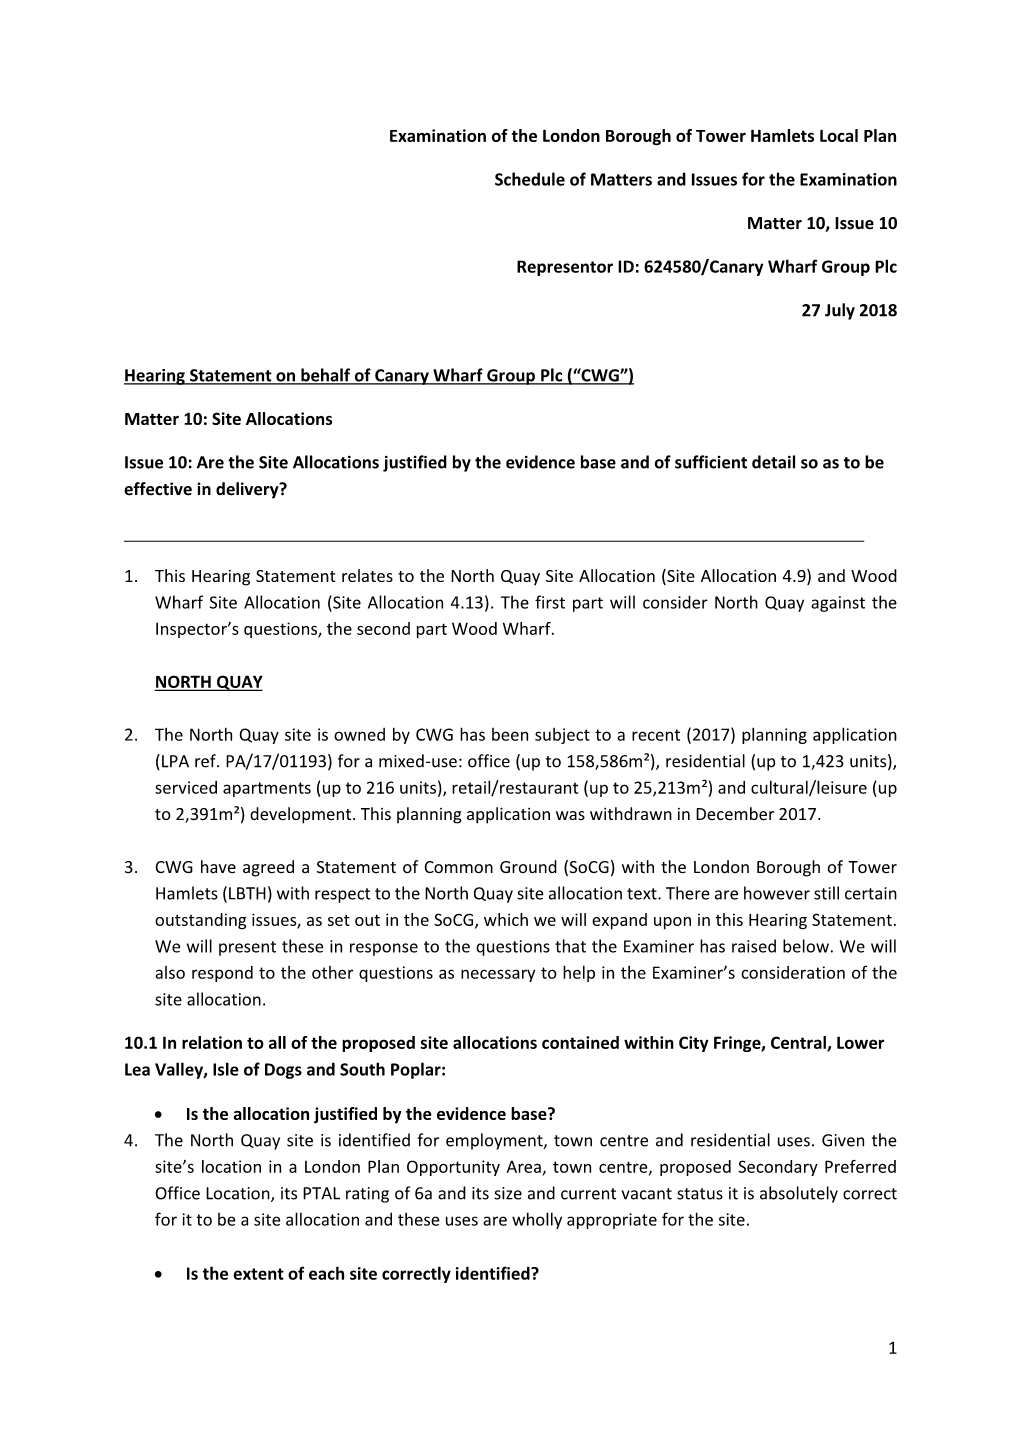 REP-624580-007 Canary Wharf Group Hearing Statement Matter 10